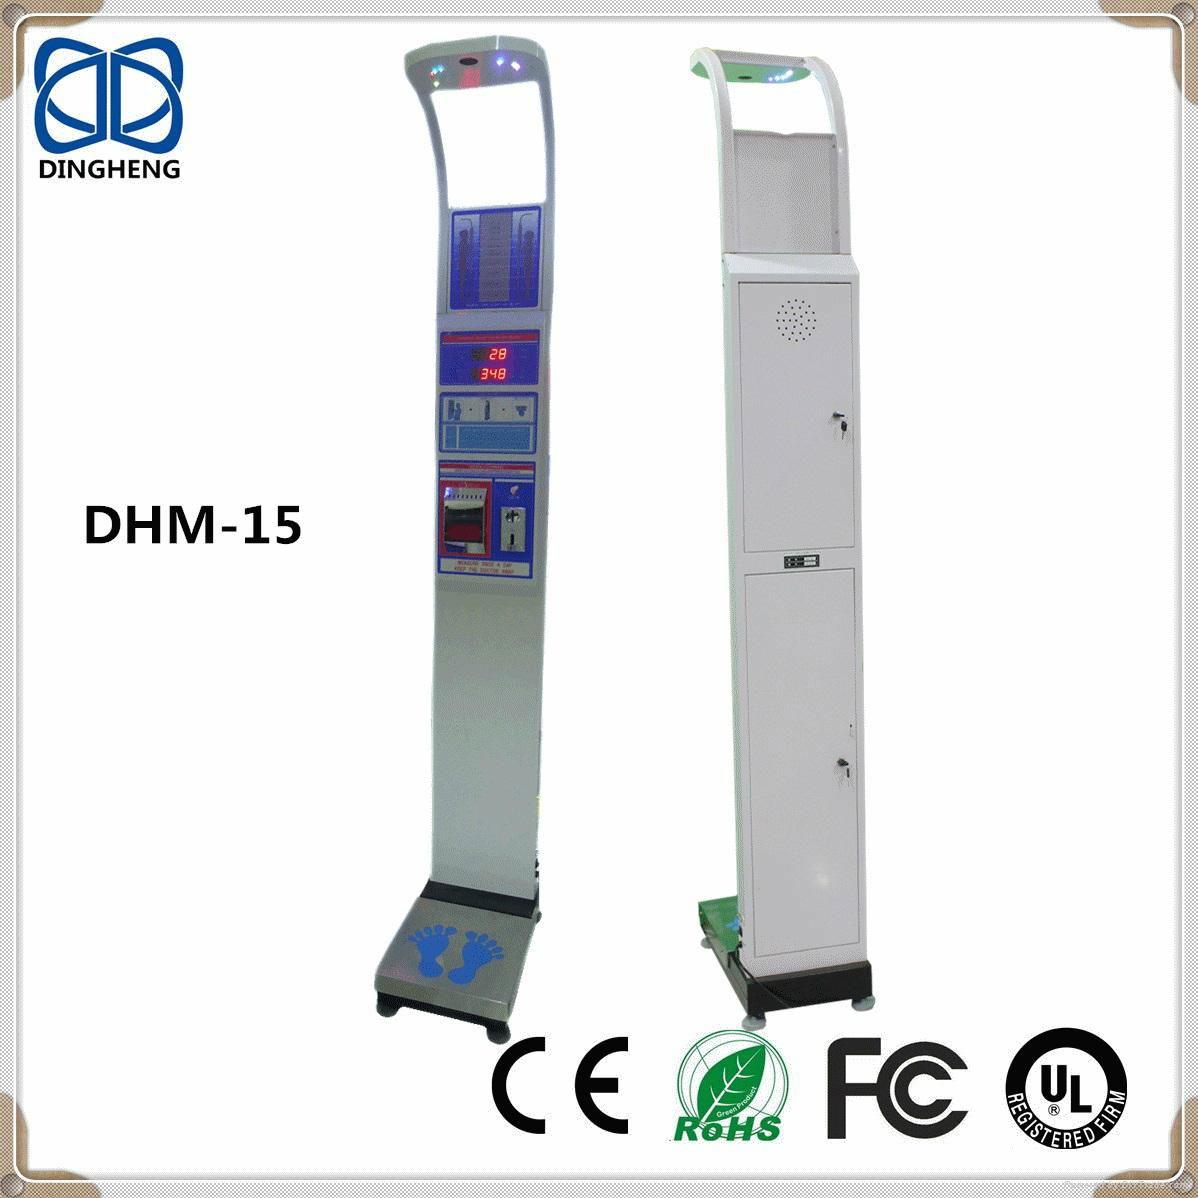 DHM-15 Height Measure Electronic Body Weight Scale Coin operated scales 2